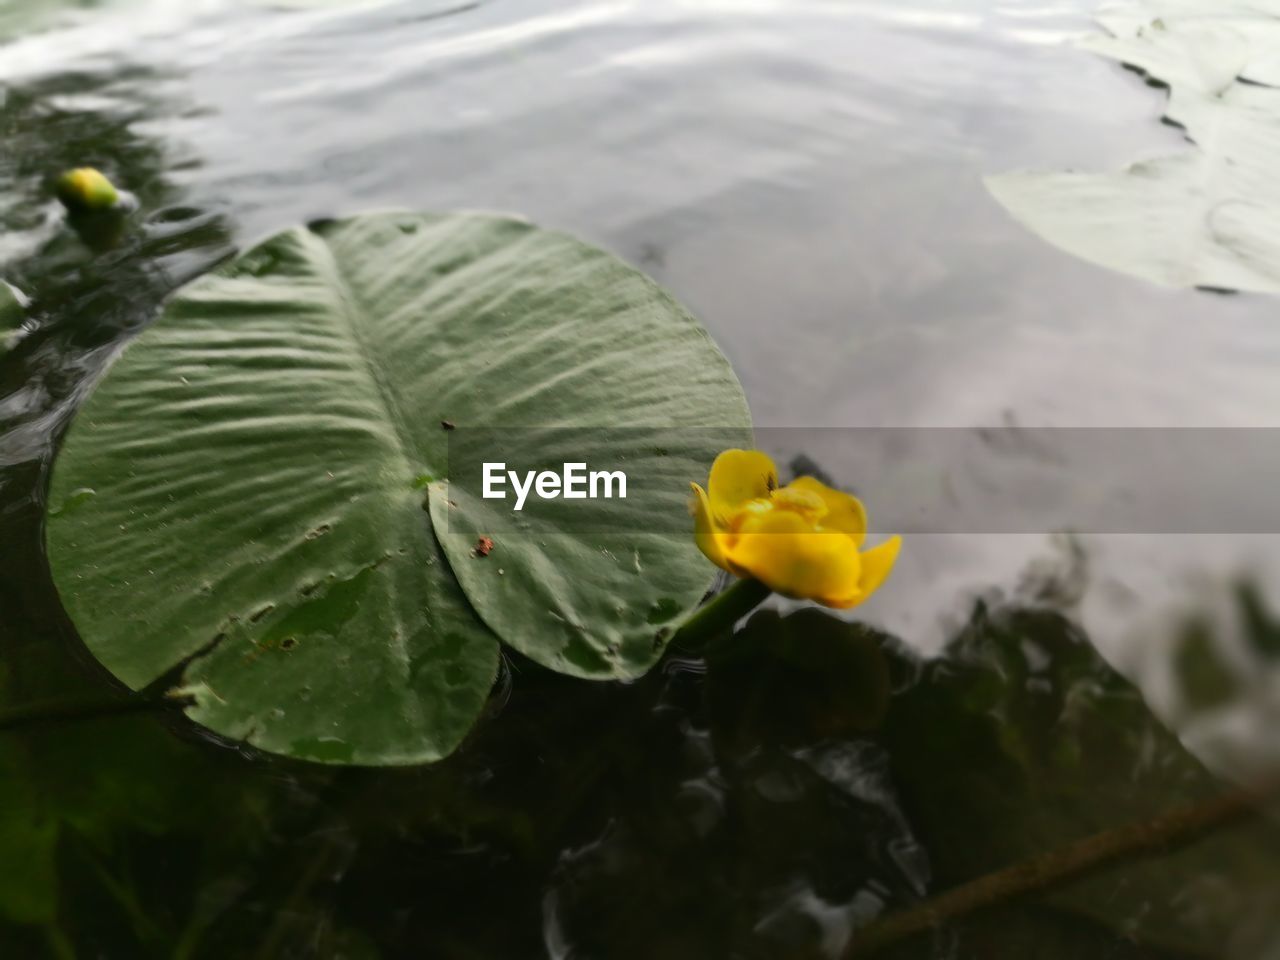 HIGH ANGLE VIEW OF YELLOW WATER LILY ON LEAVES